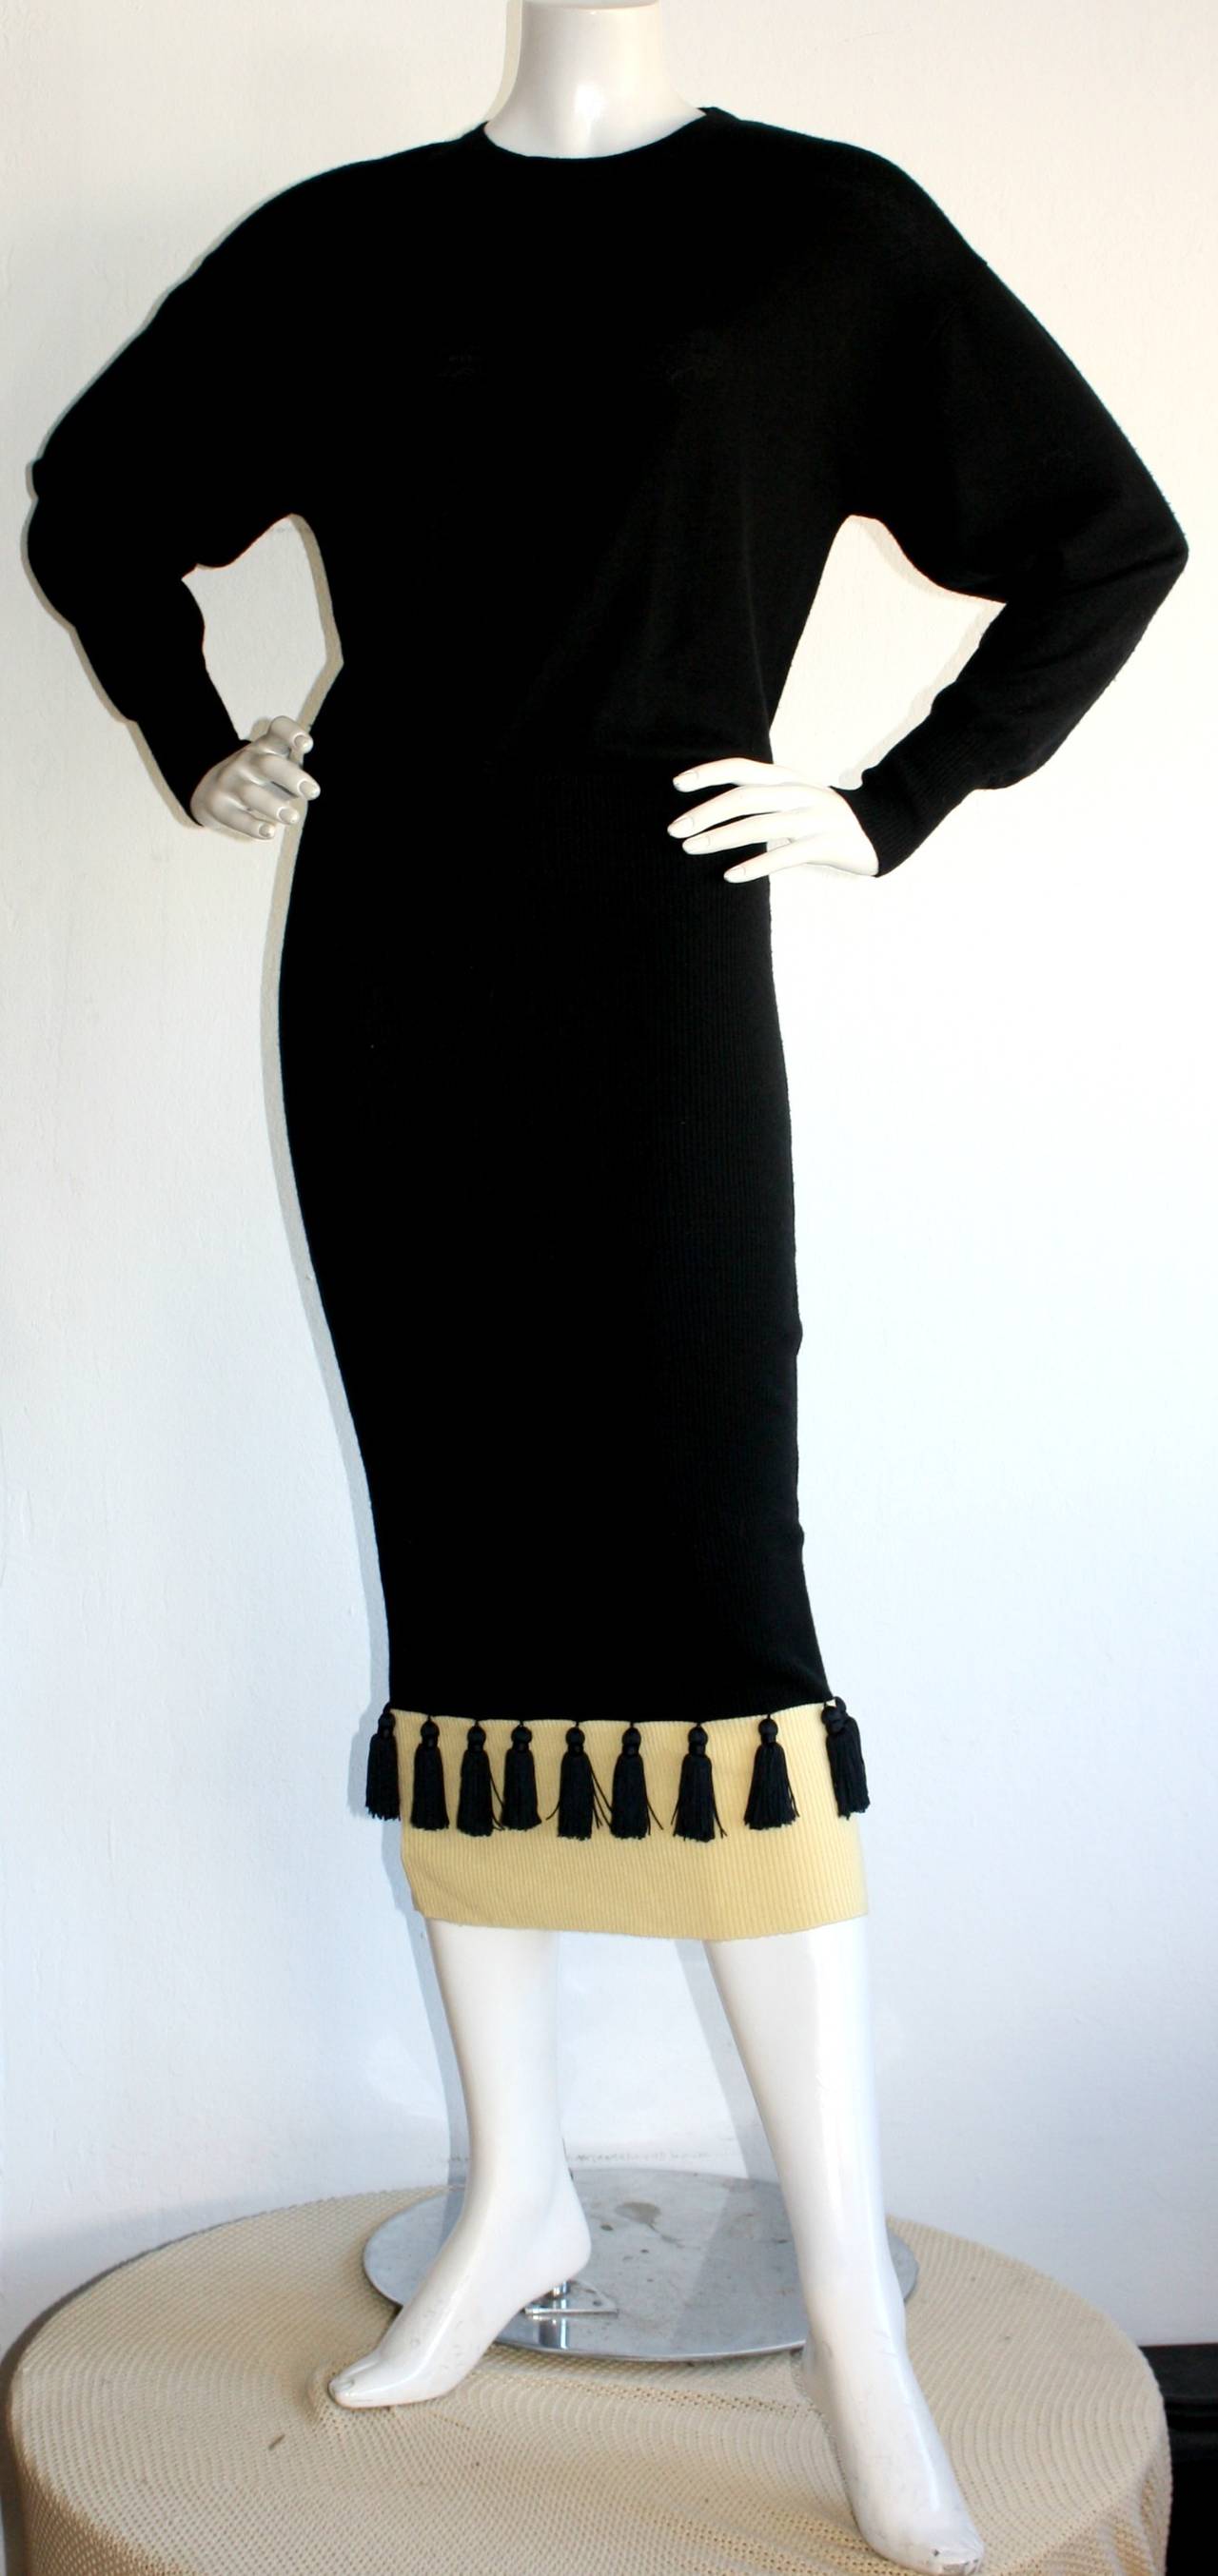 Stunning vintage Angelo Tarlazzi tassel sweater dress. Flattering fit, that can be worn as a drop-waist dress, or pulled up. Signature tassels at hem, that Tarlazzi is so well known for. Dolman sleeves that add a bit of Avant Garde to this beauty!